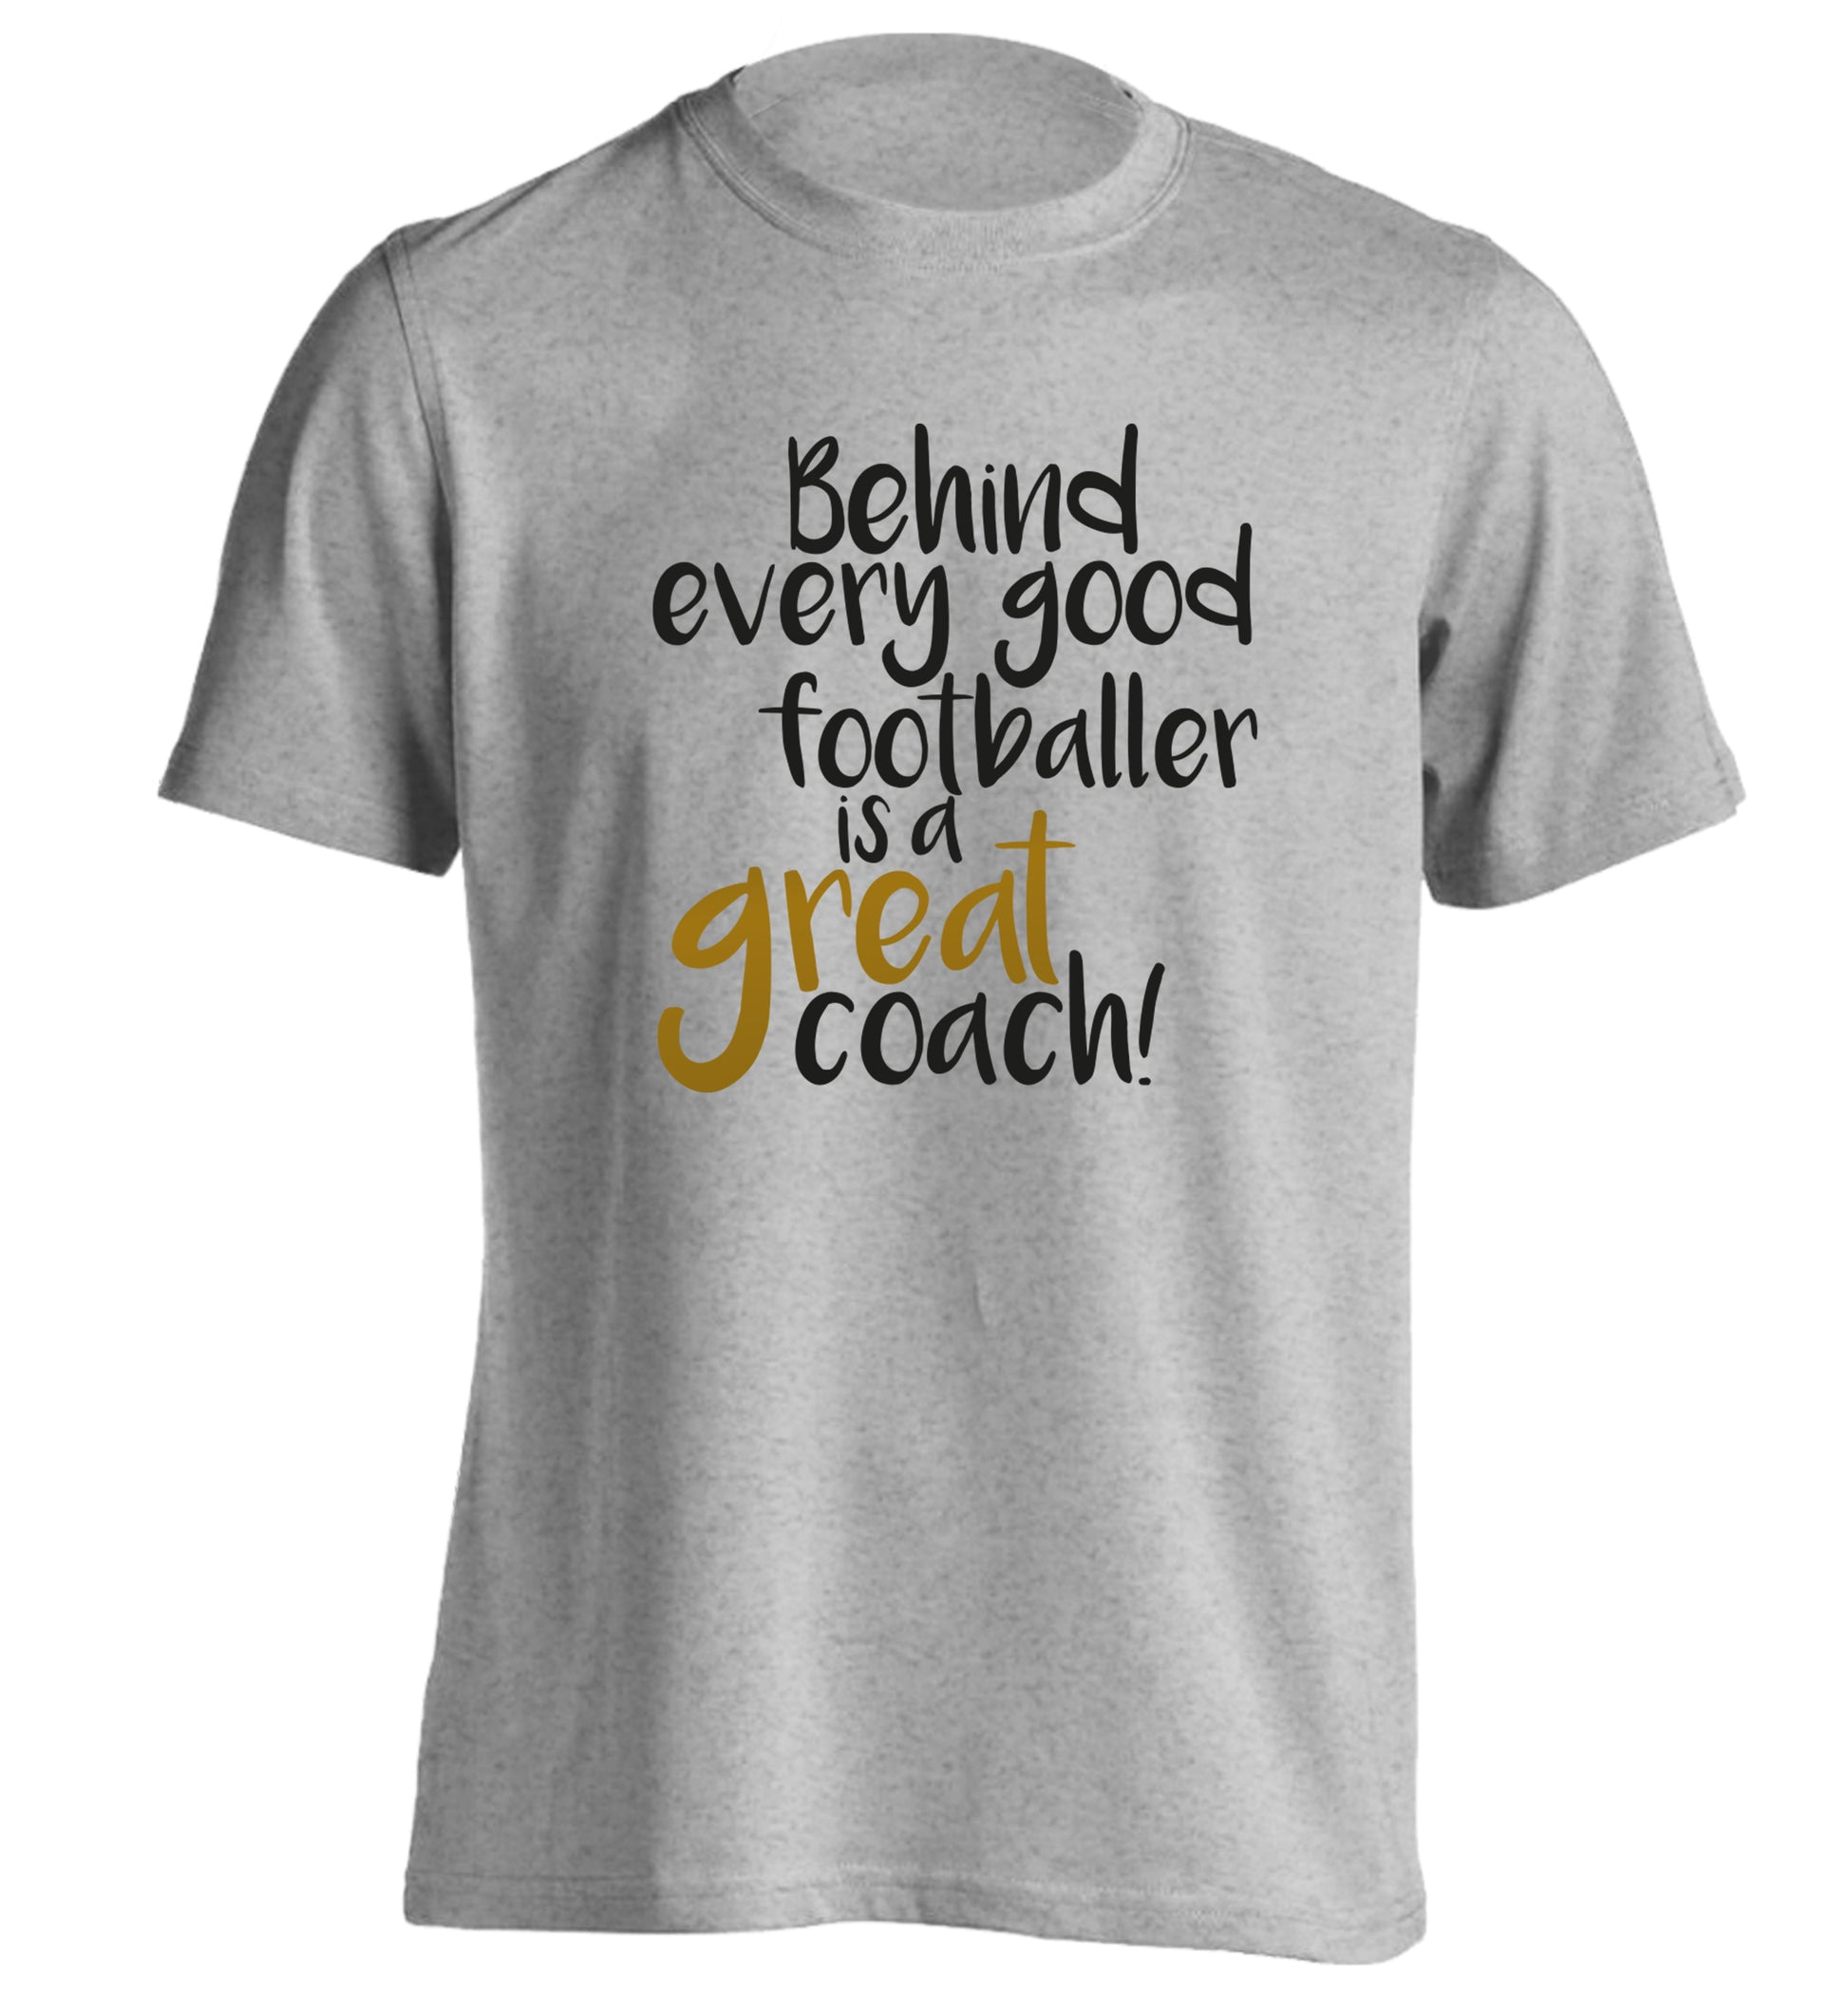 Behind every good footballer is a great coach! adults unisexgrey Tshirt 2XL